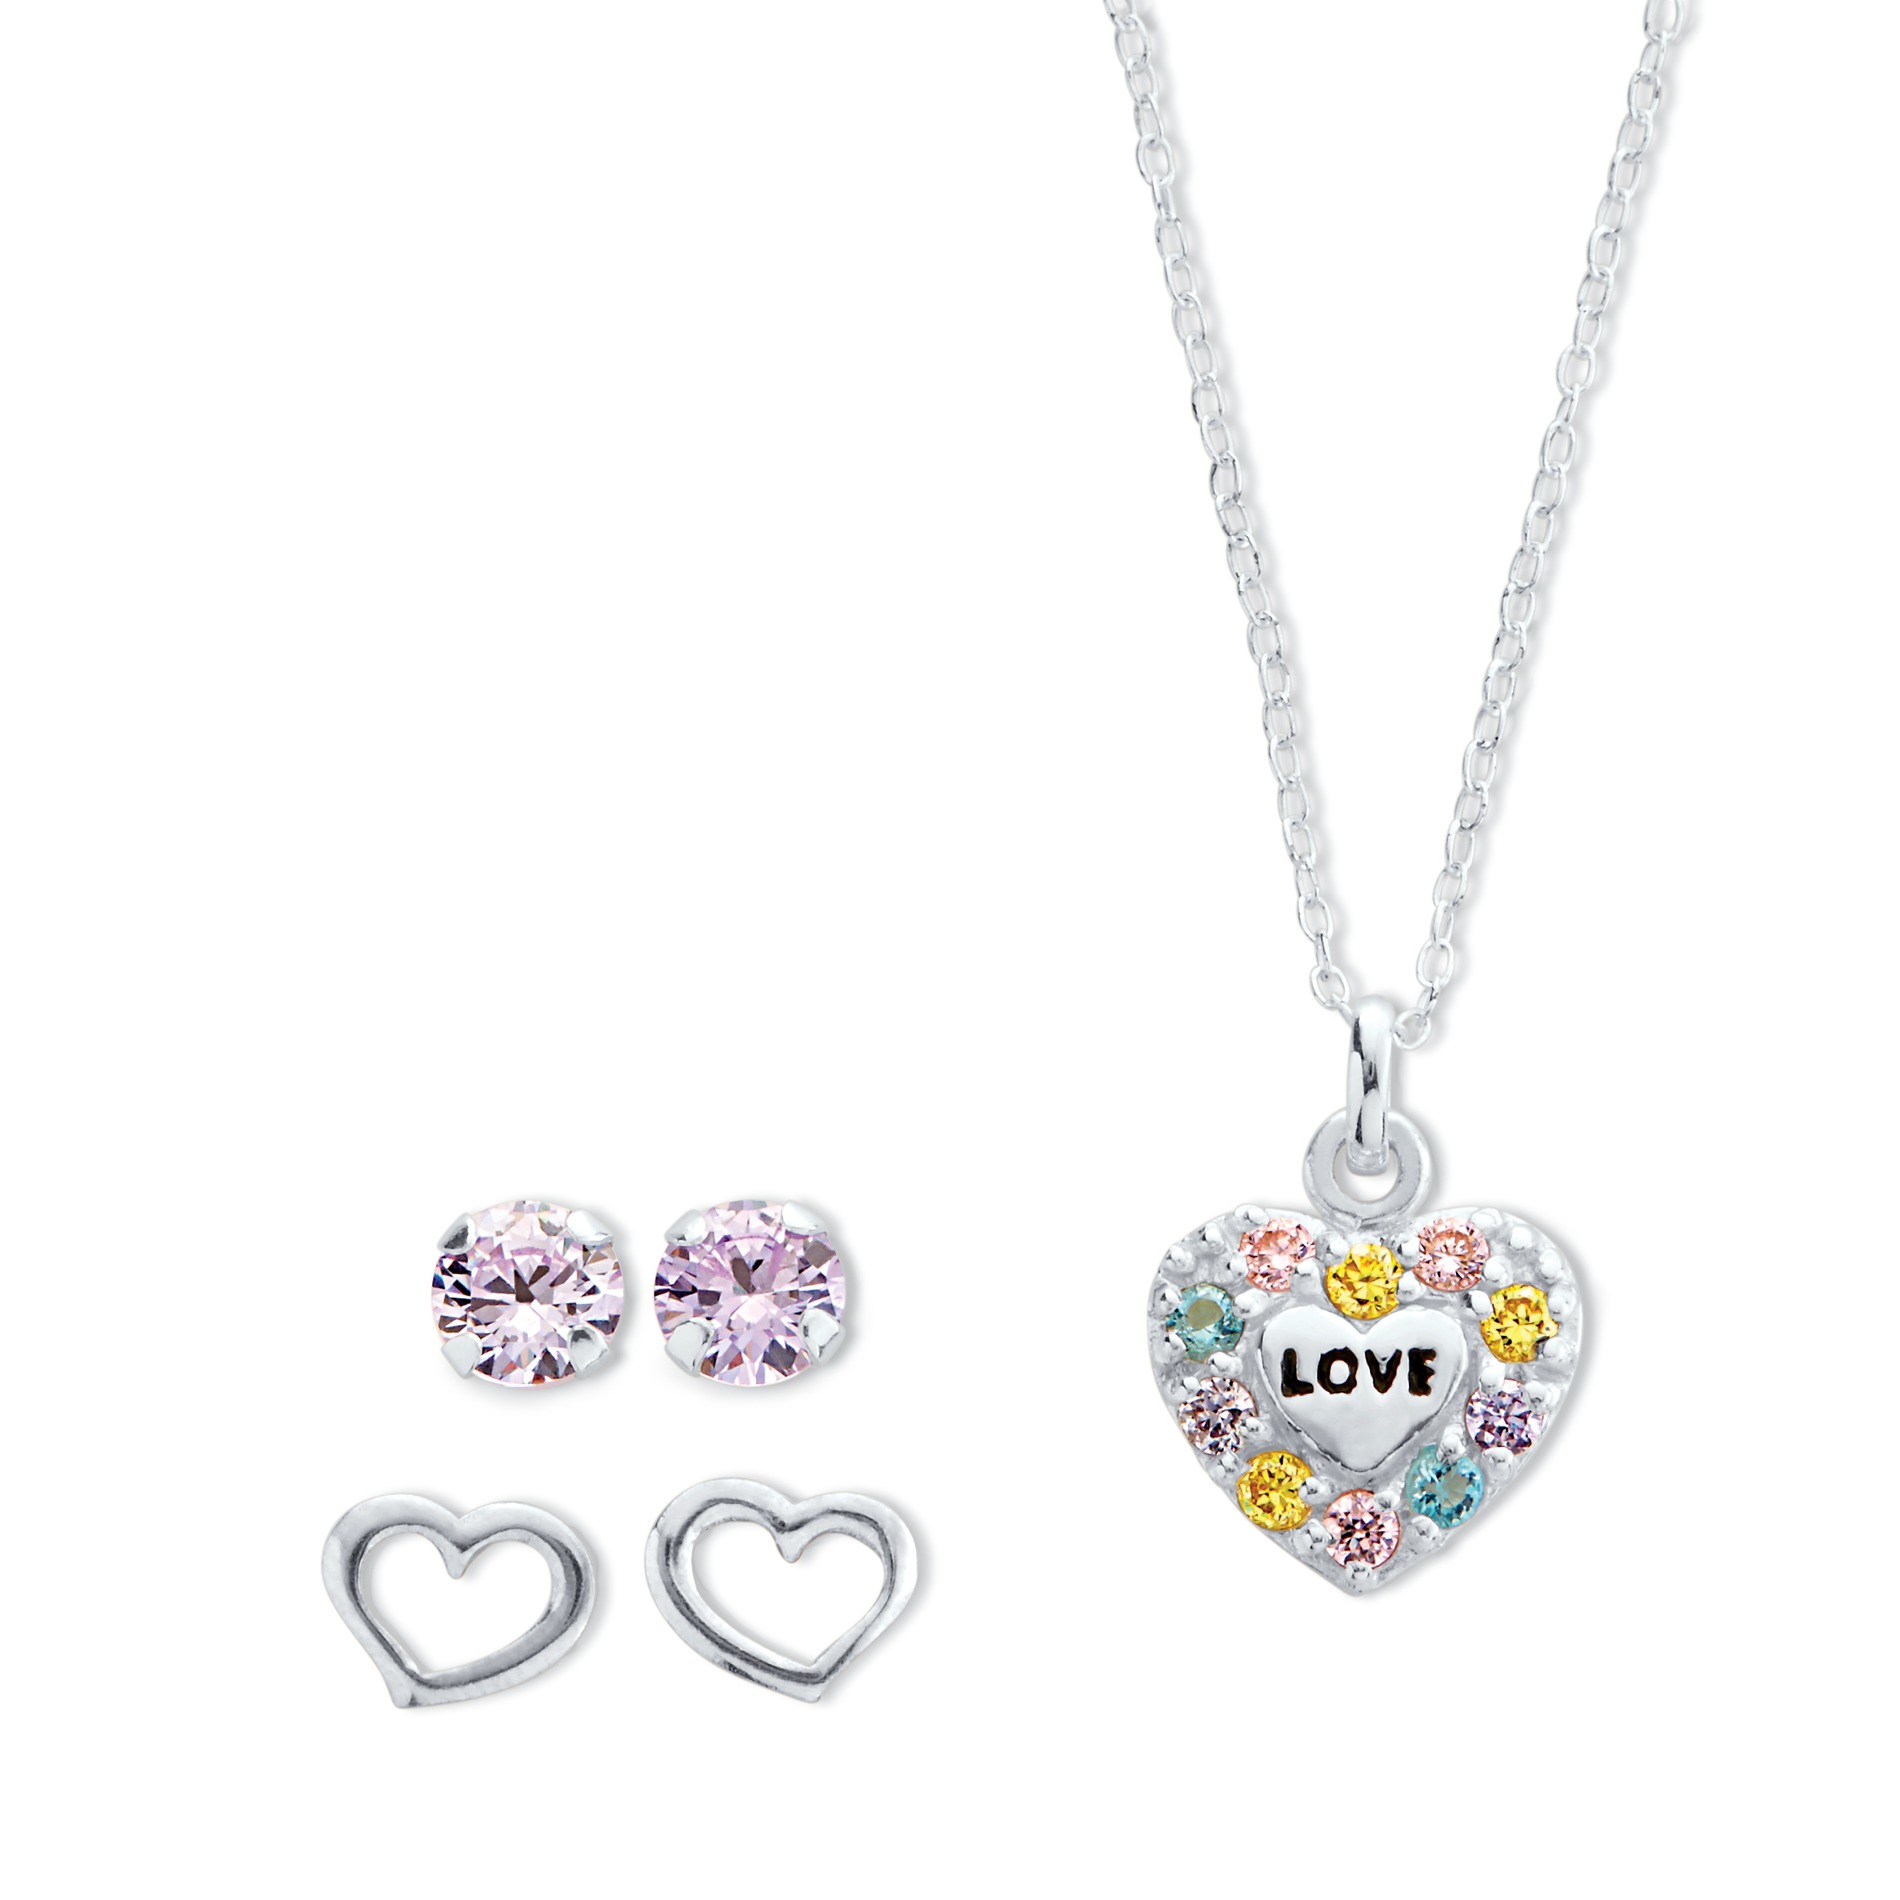 Cute 3 Piece Jewelry Set Only $24.99! Great for Your Valentine! (Reg $100)